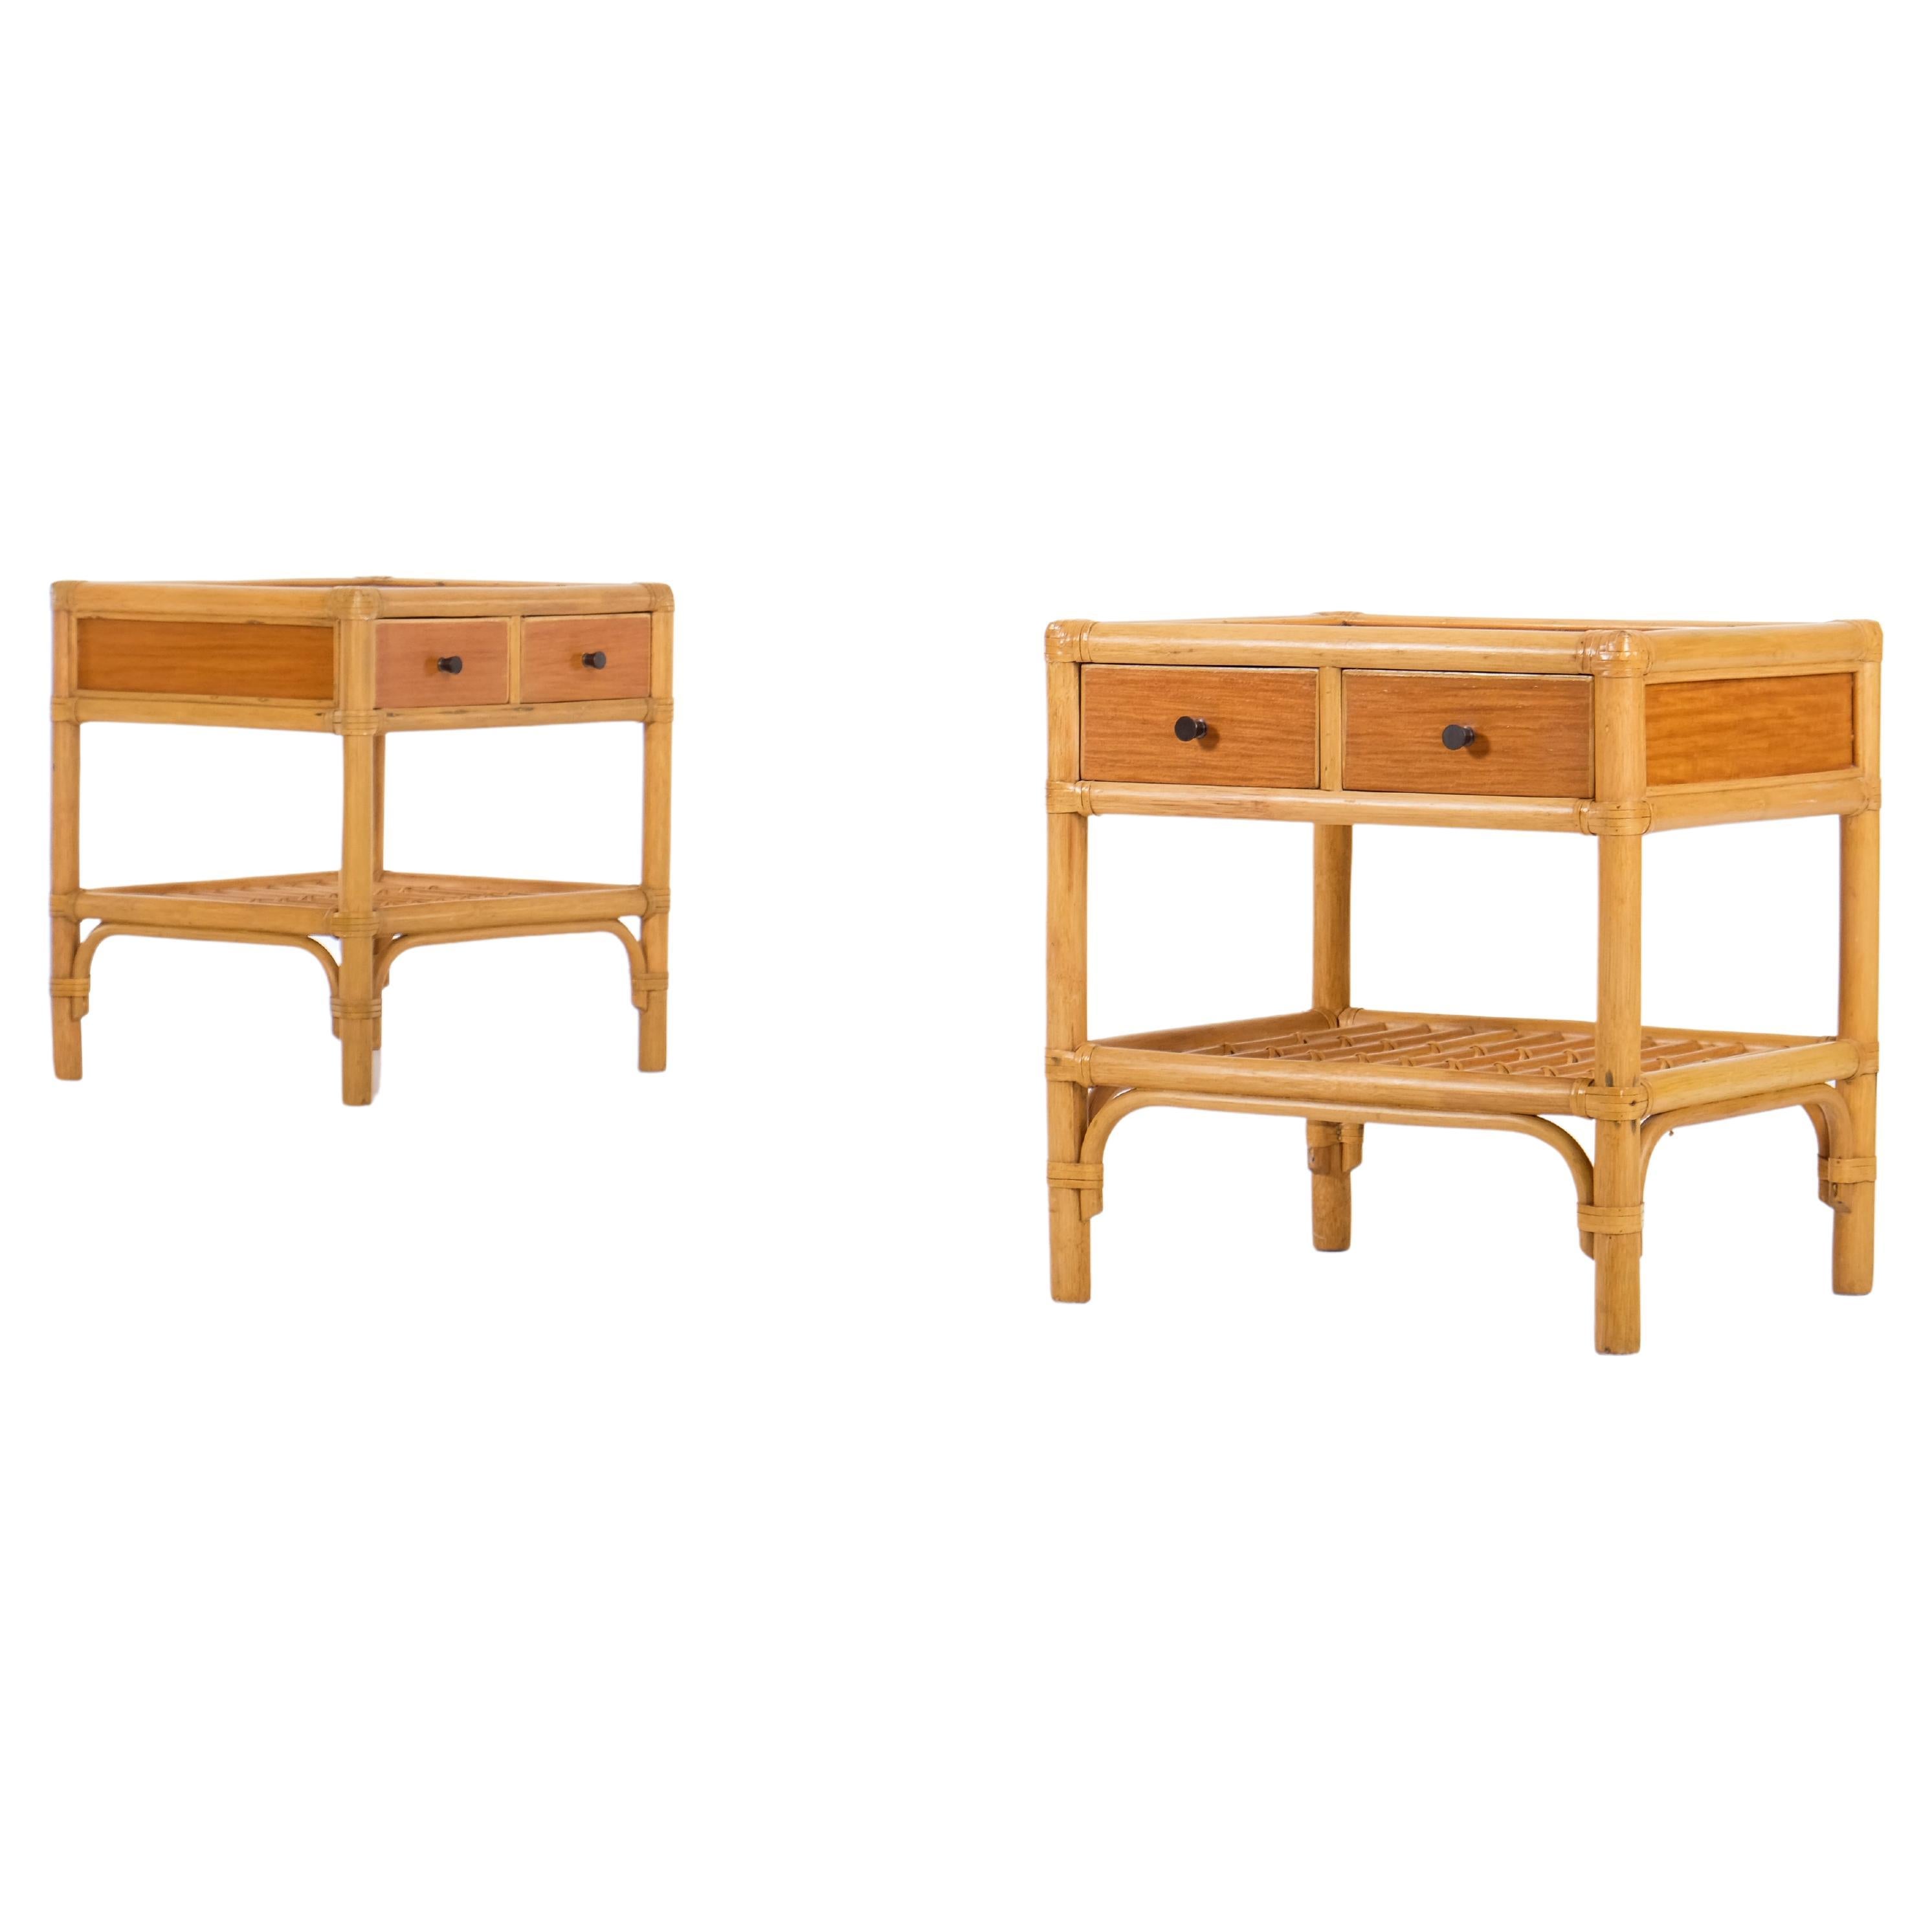 Pair of bedside tables by DUX, Sweden, 1970s